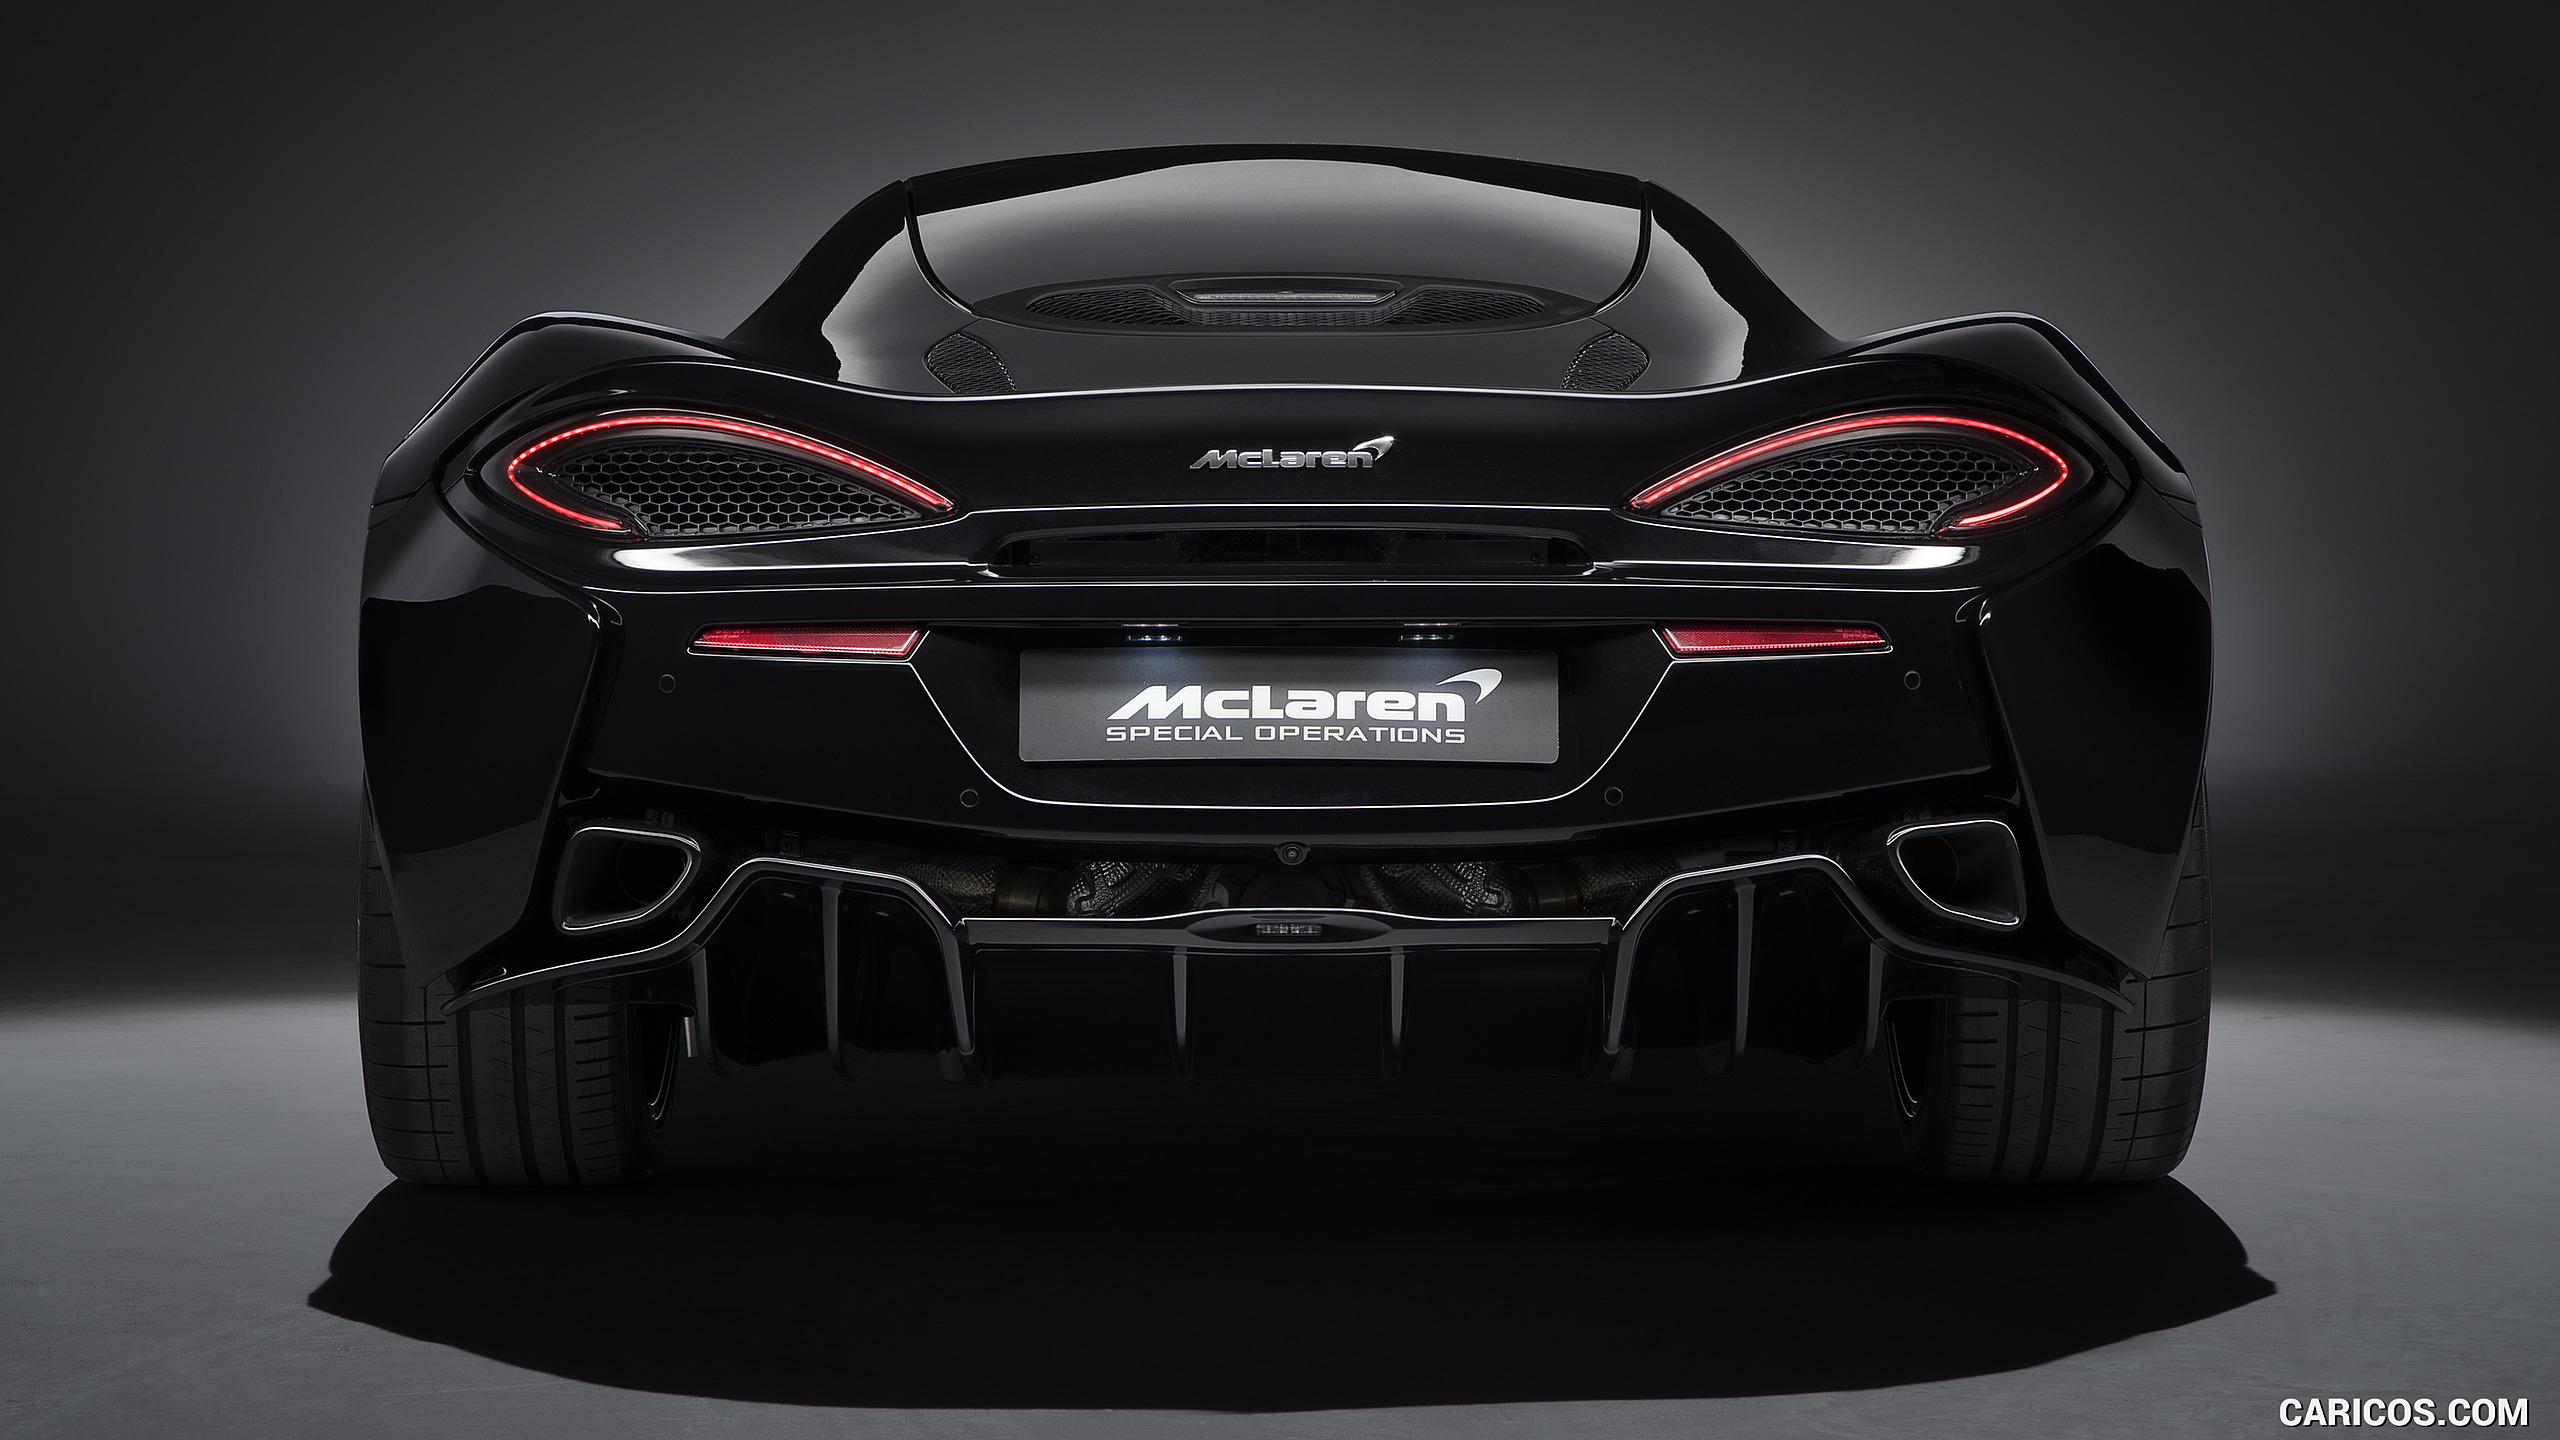 2018 McLaren 570GT MSO Black Collection - Rear, #4 of 10